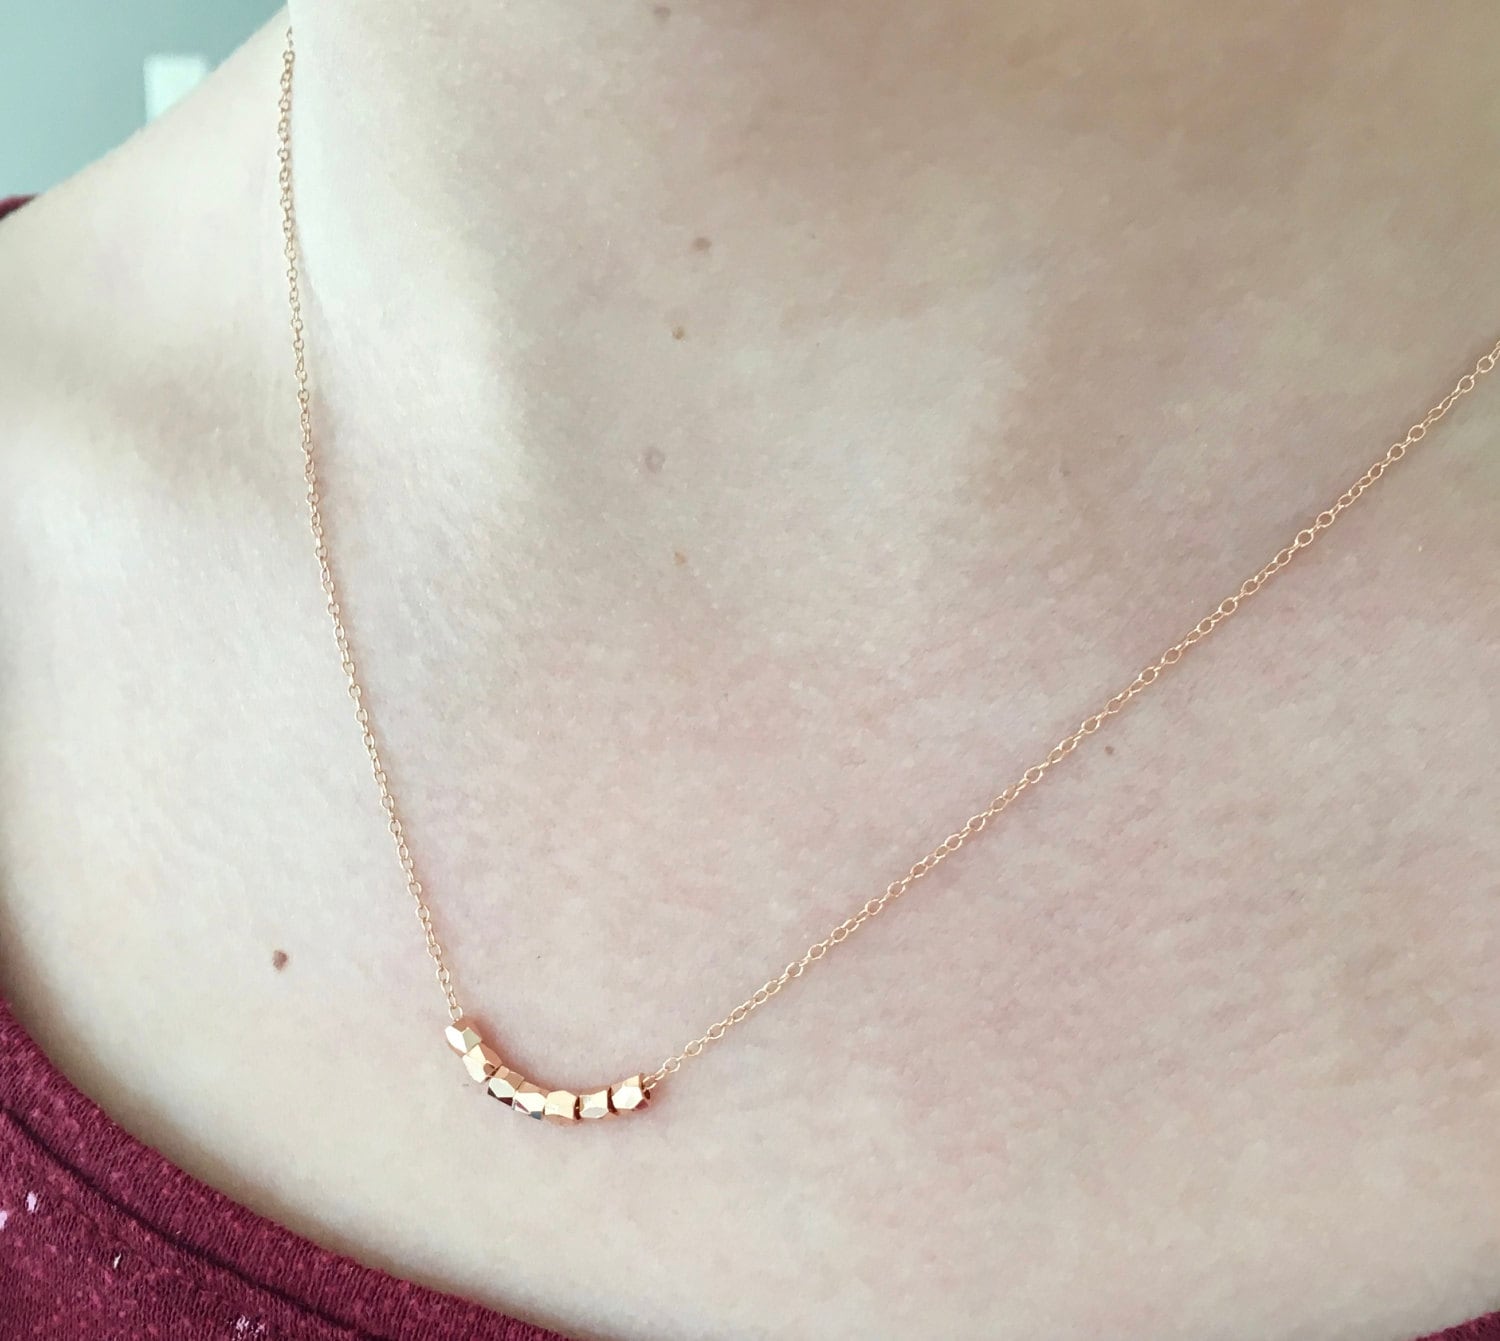 Rose Gold Necklace, Dainty Rose Gold Necklace, Rose Gold Jewelry, Rose Gold Bead, Layering Necklace, Bridesmaid Gifts, Best Friend Gifts